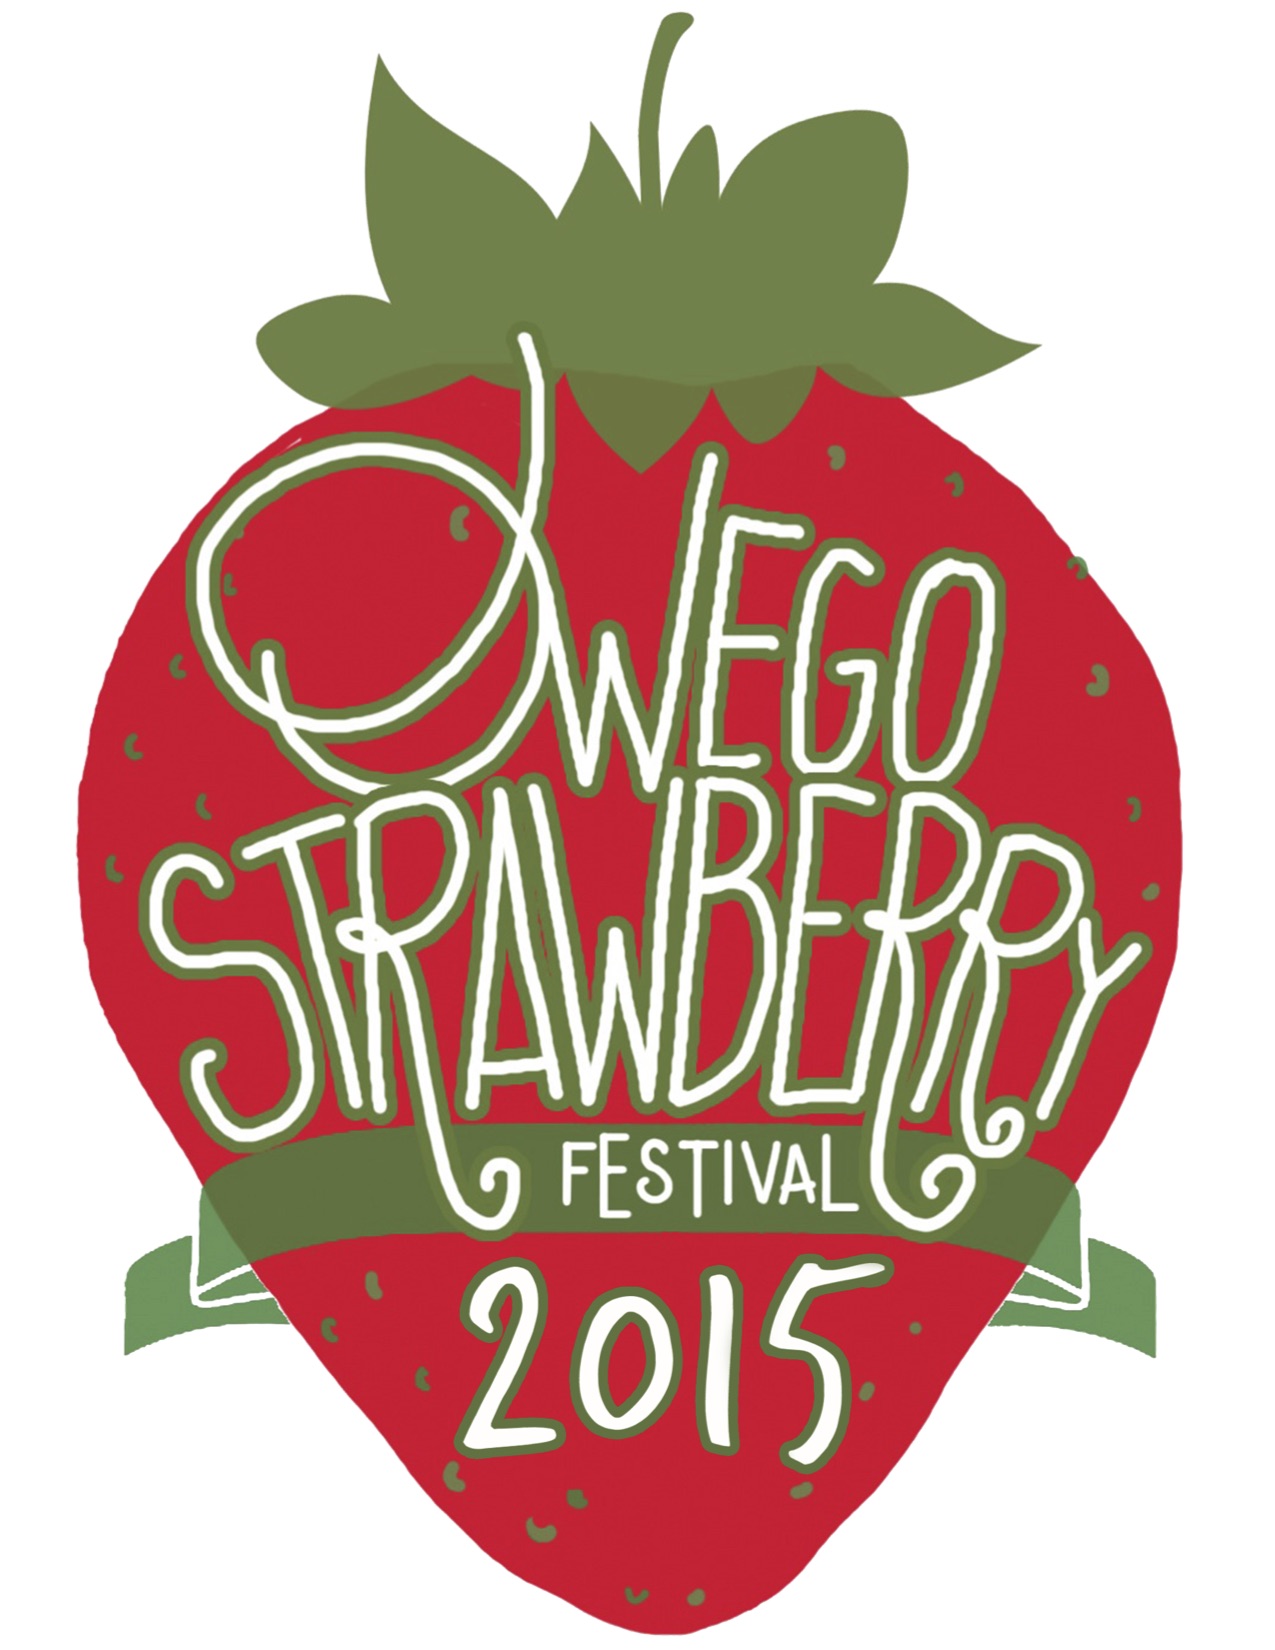 Plans gearing up for this year’s Strawberry Festival; June 19 and 20